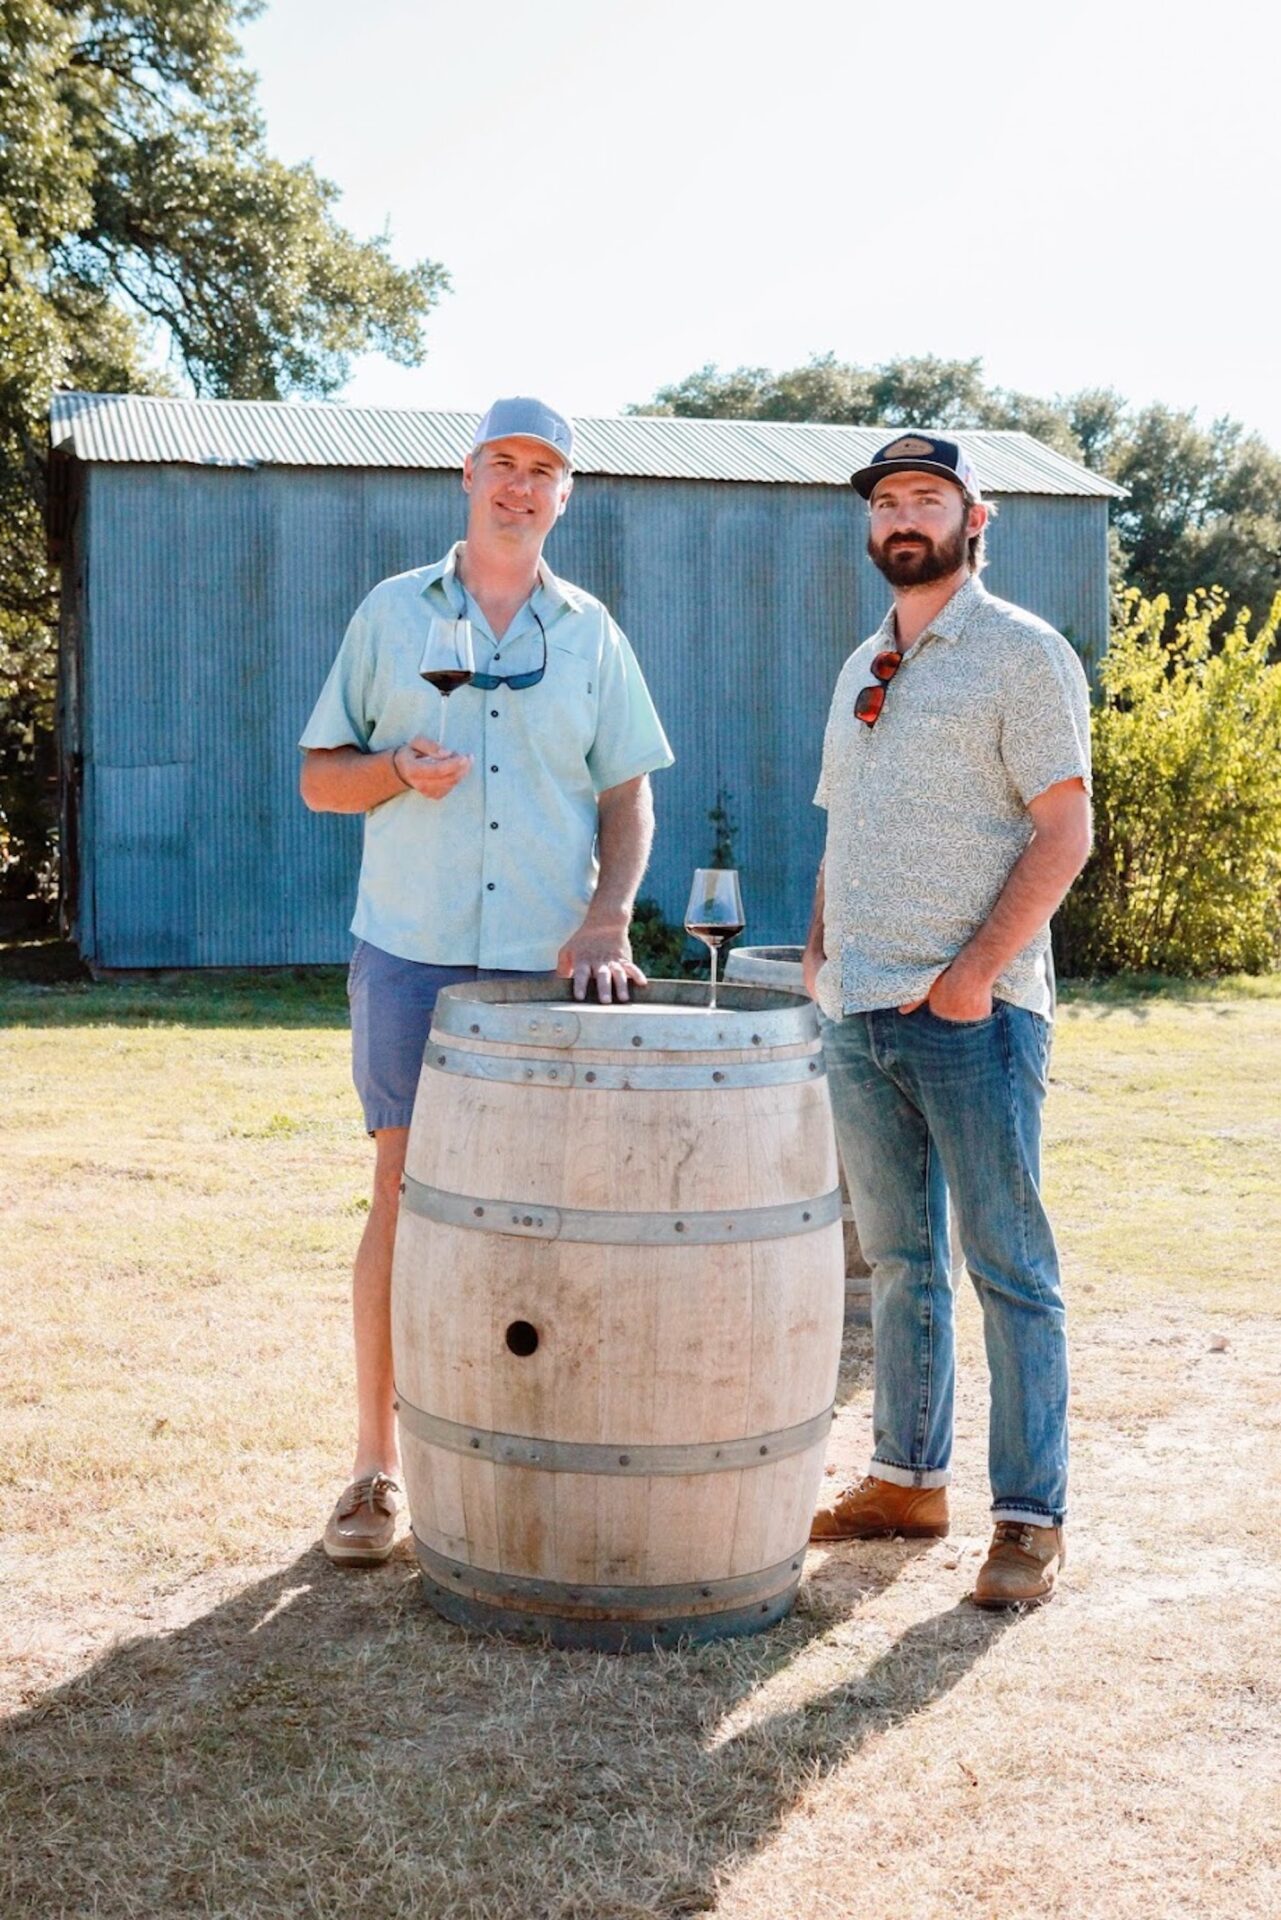 Andrew Sides and Chris Brundrett of Williams Chris Vineyards and Lost Draw Cellars